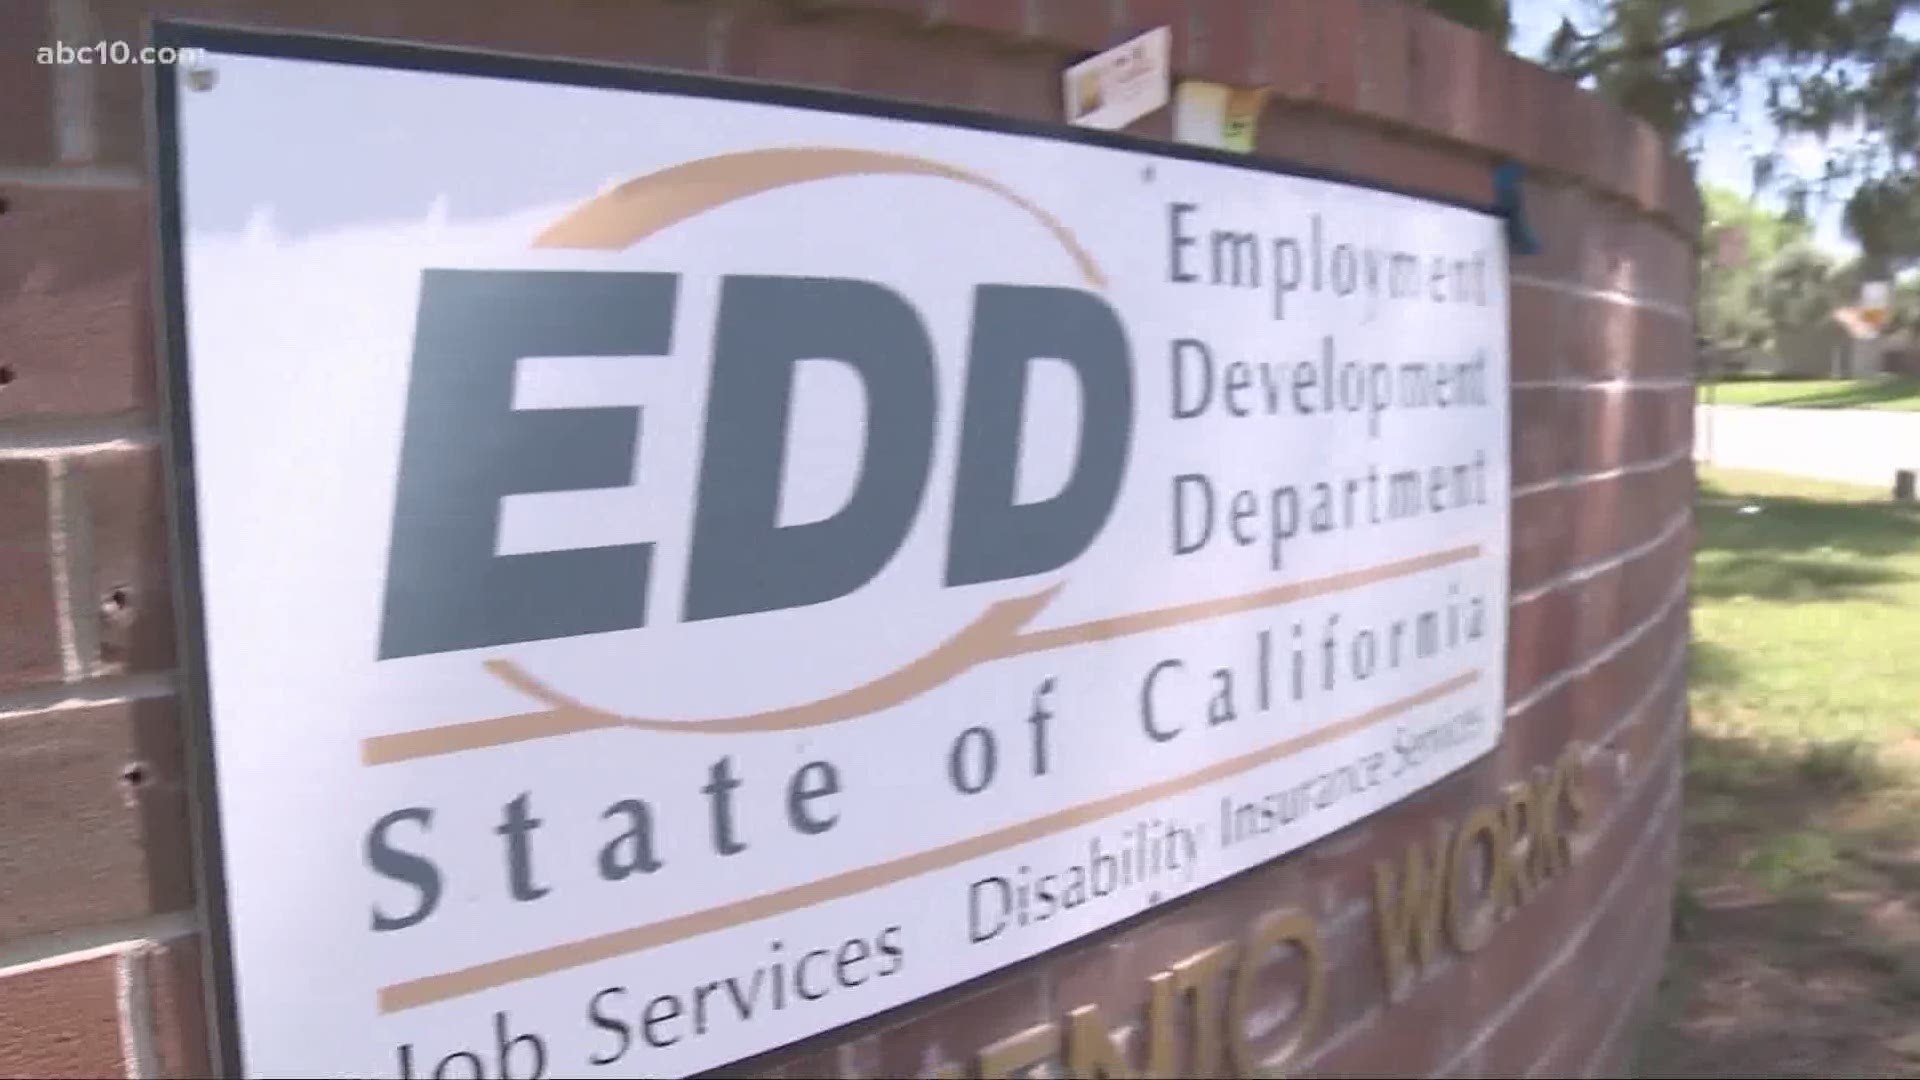 California's EDD told the state assembly it is "on schedule" to get $300 in additional unemployment assistance out to people in September.